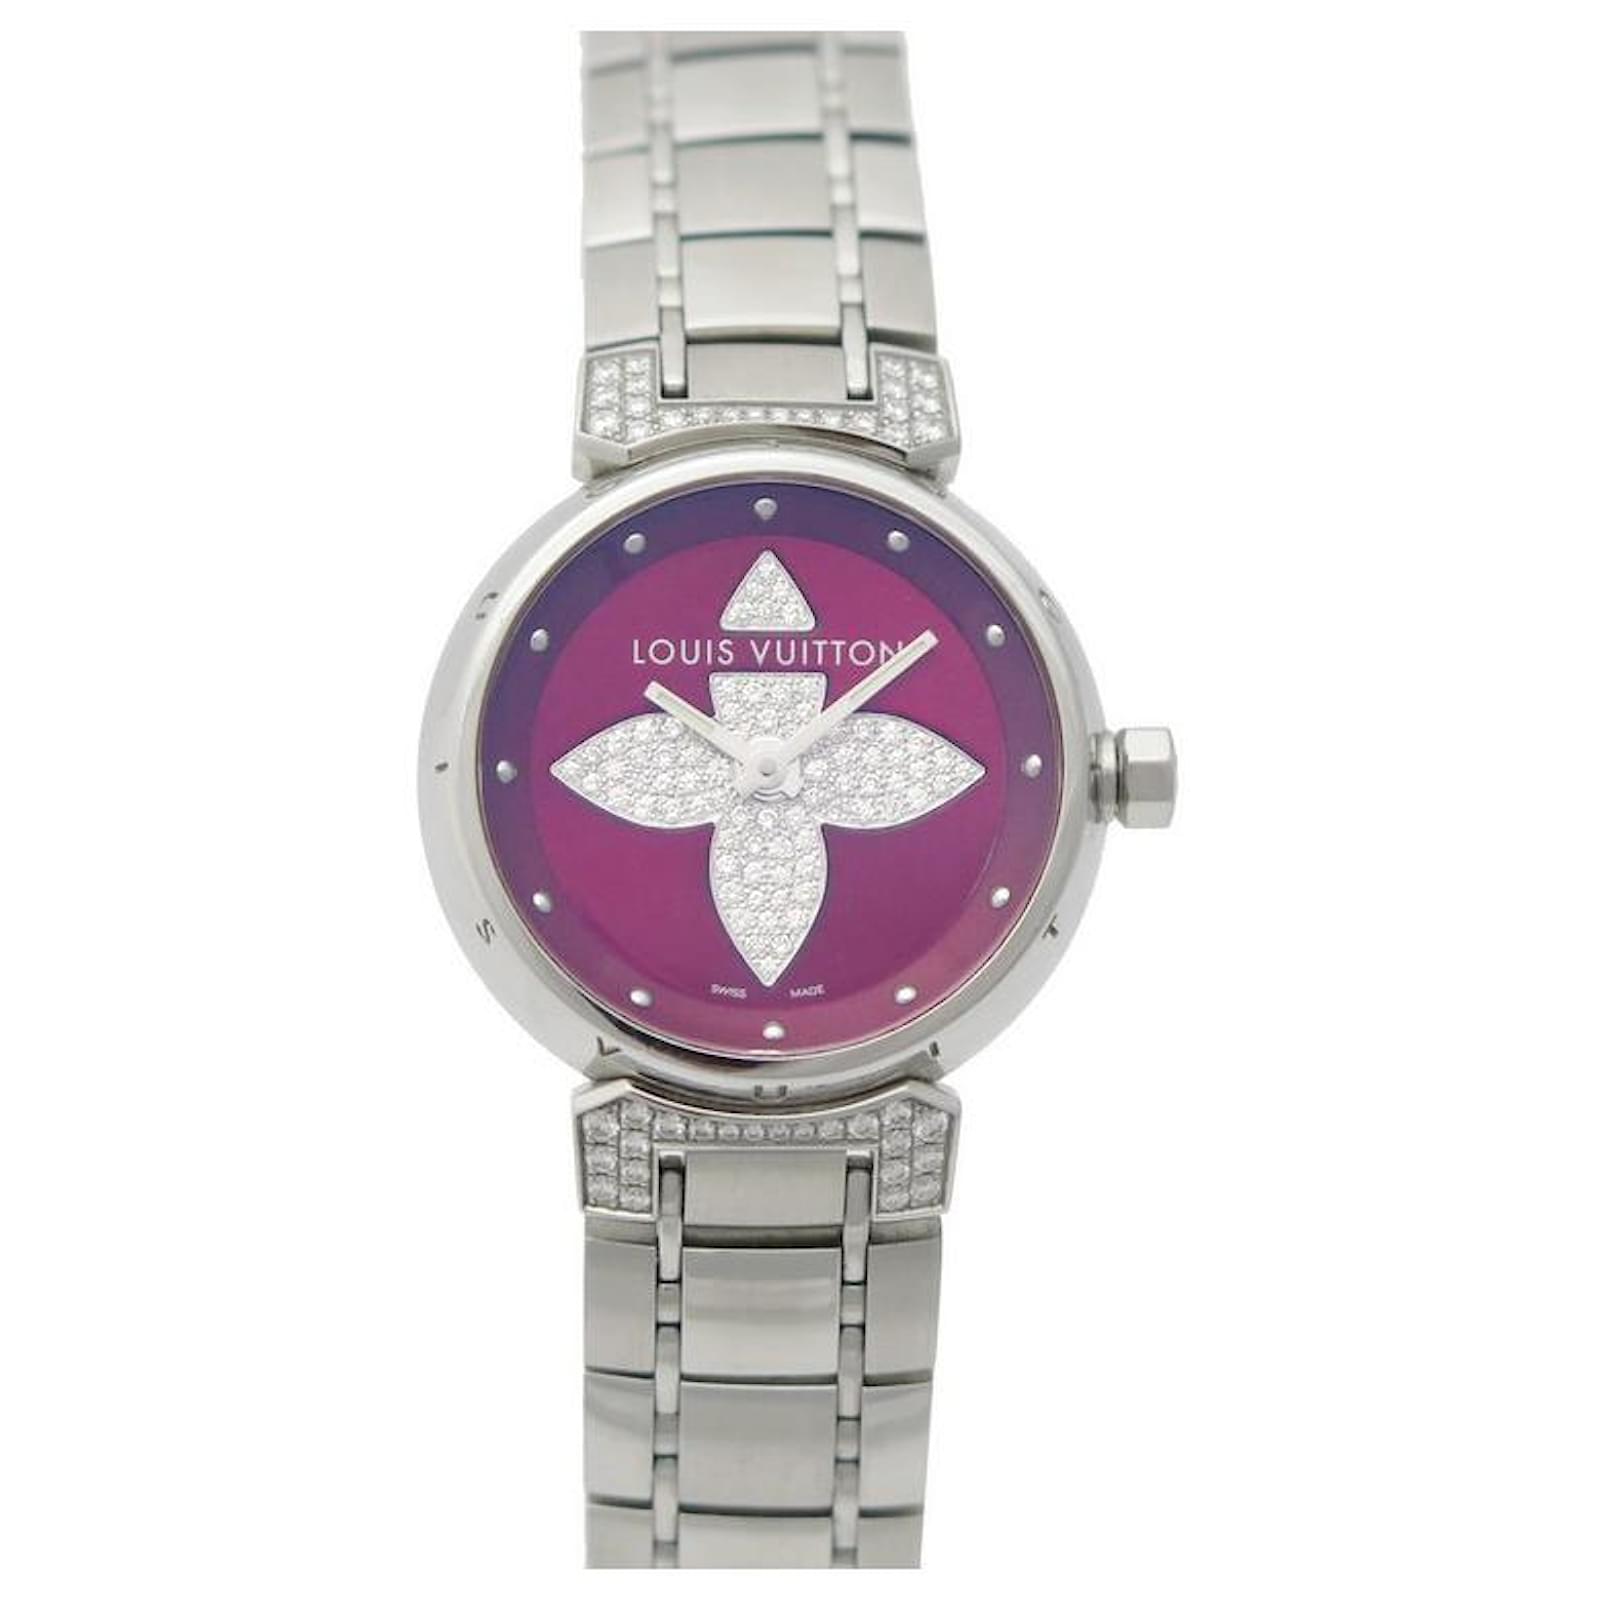 The Louis Vuitton Tambour Idylle Blossom